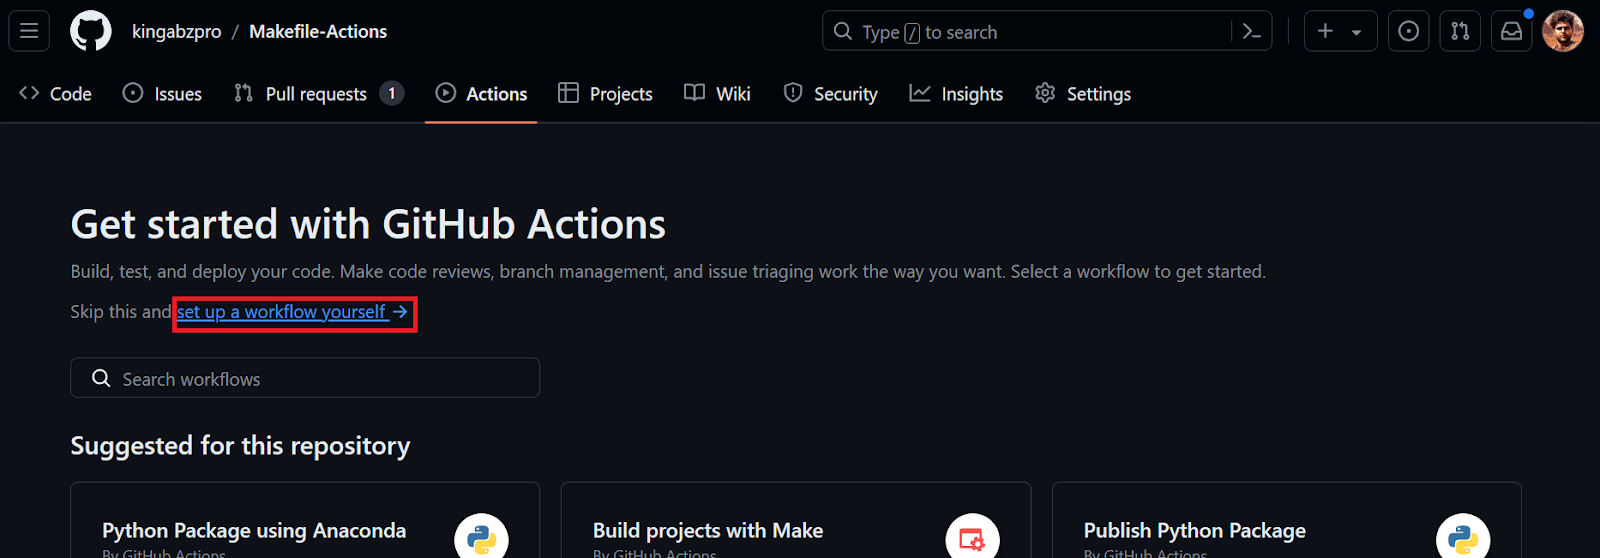 getting started with GitHub actions